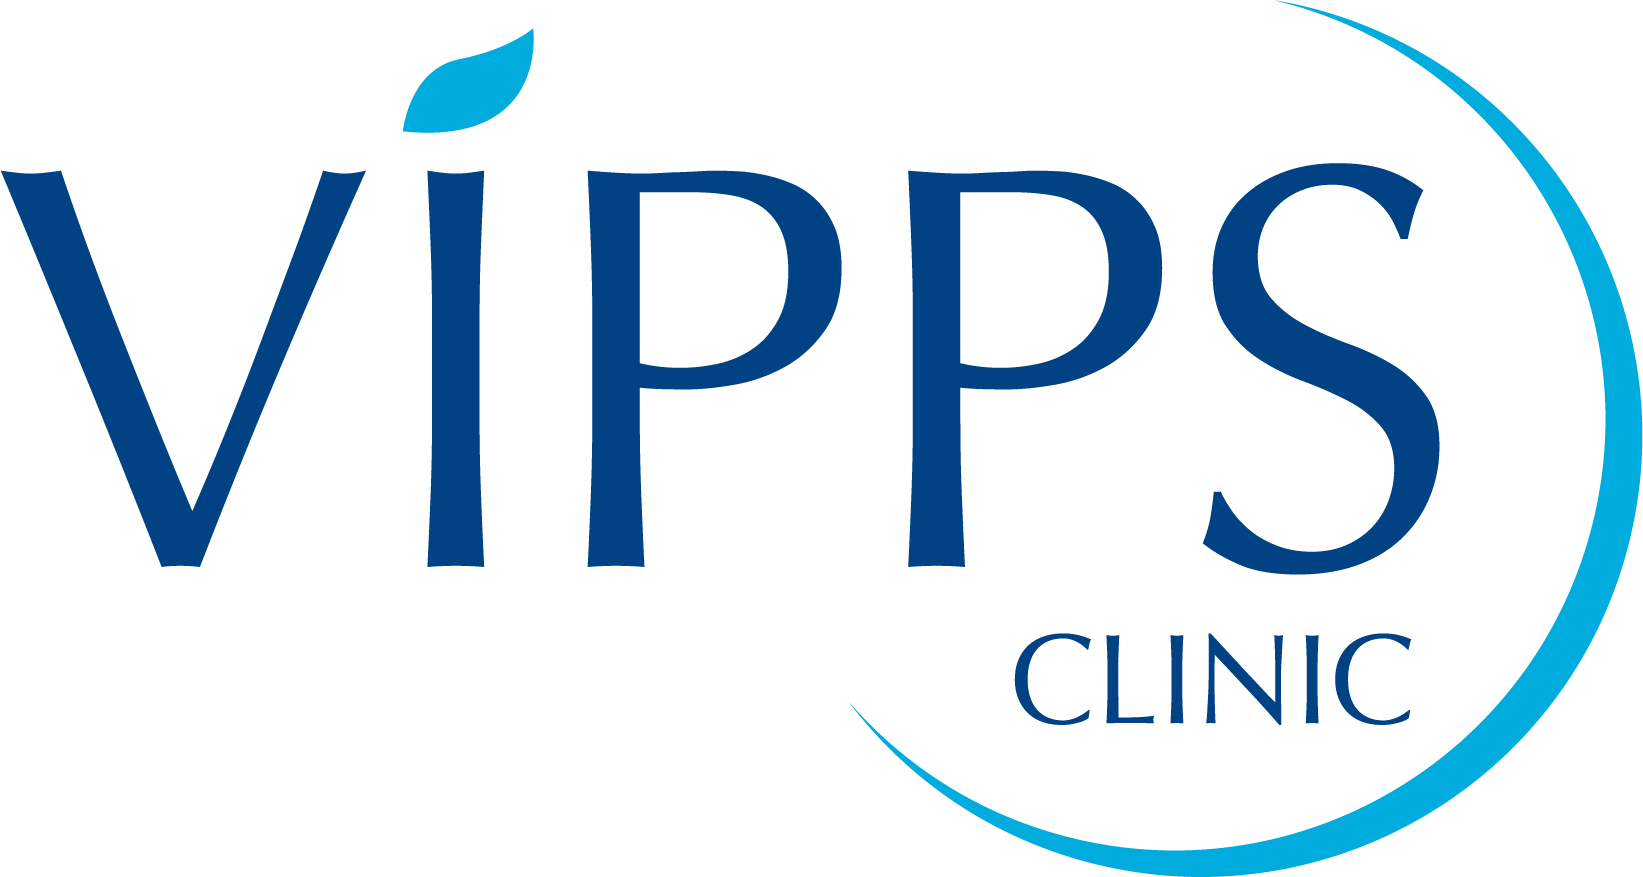 VIPPS Clinic